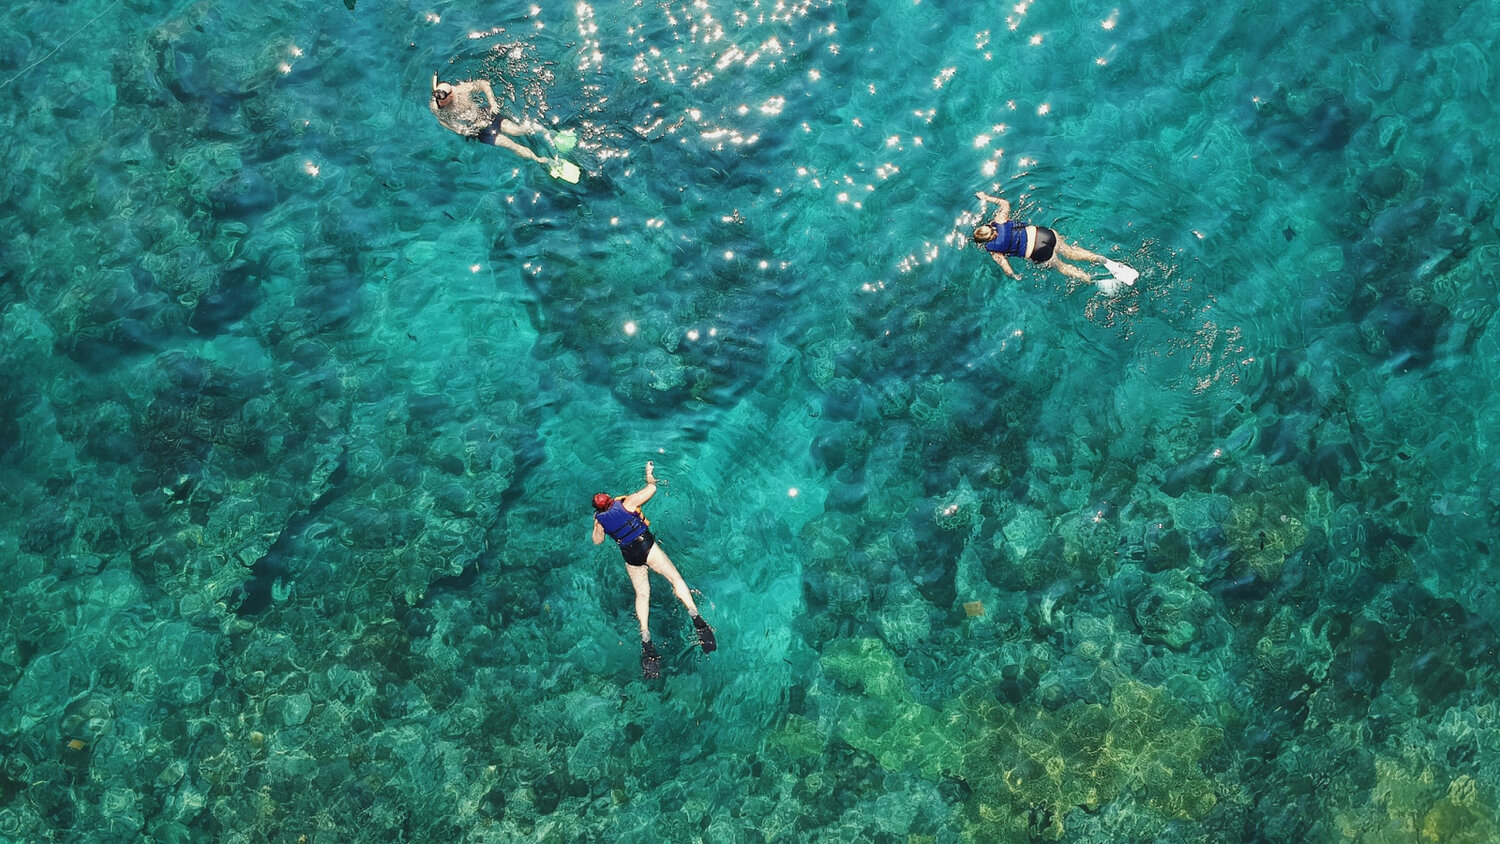 Snorkeling in Cozumel Mexico - You Should Bring the Kids - Rad Family Travel